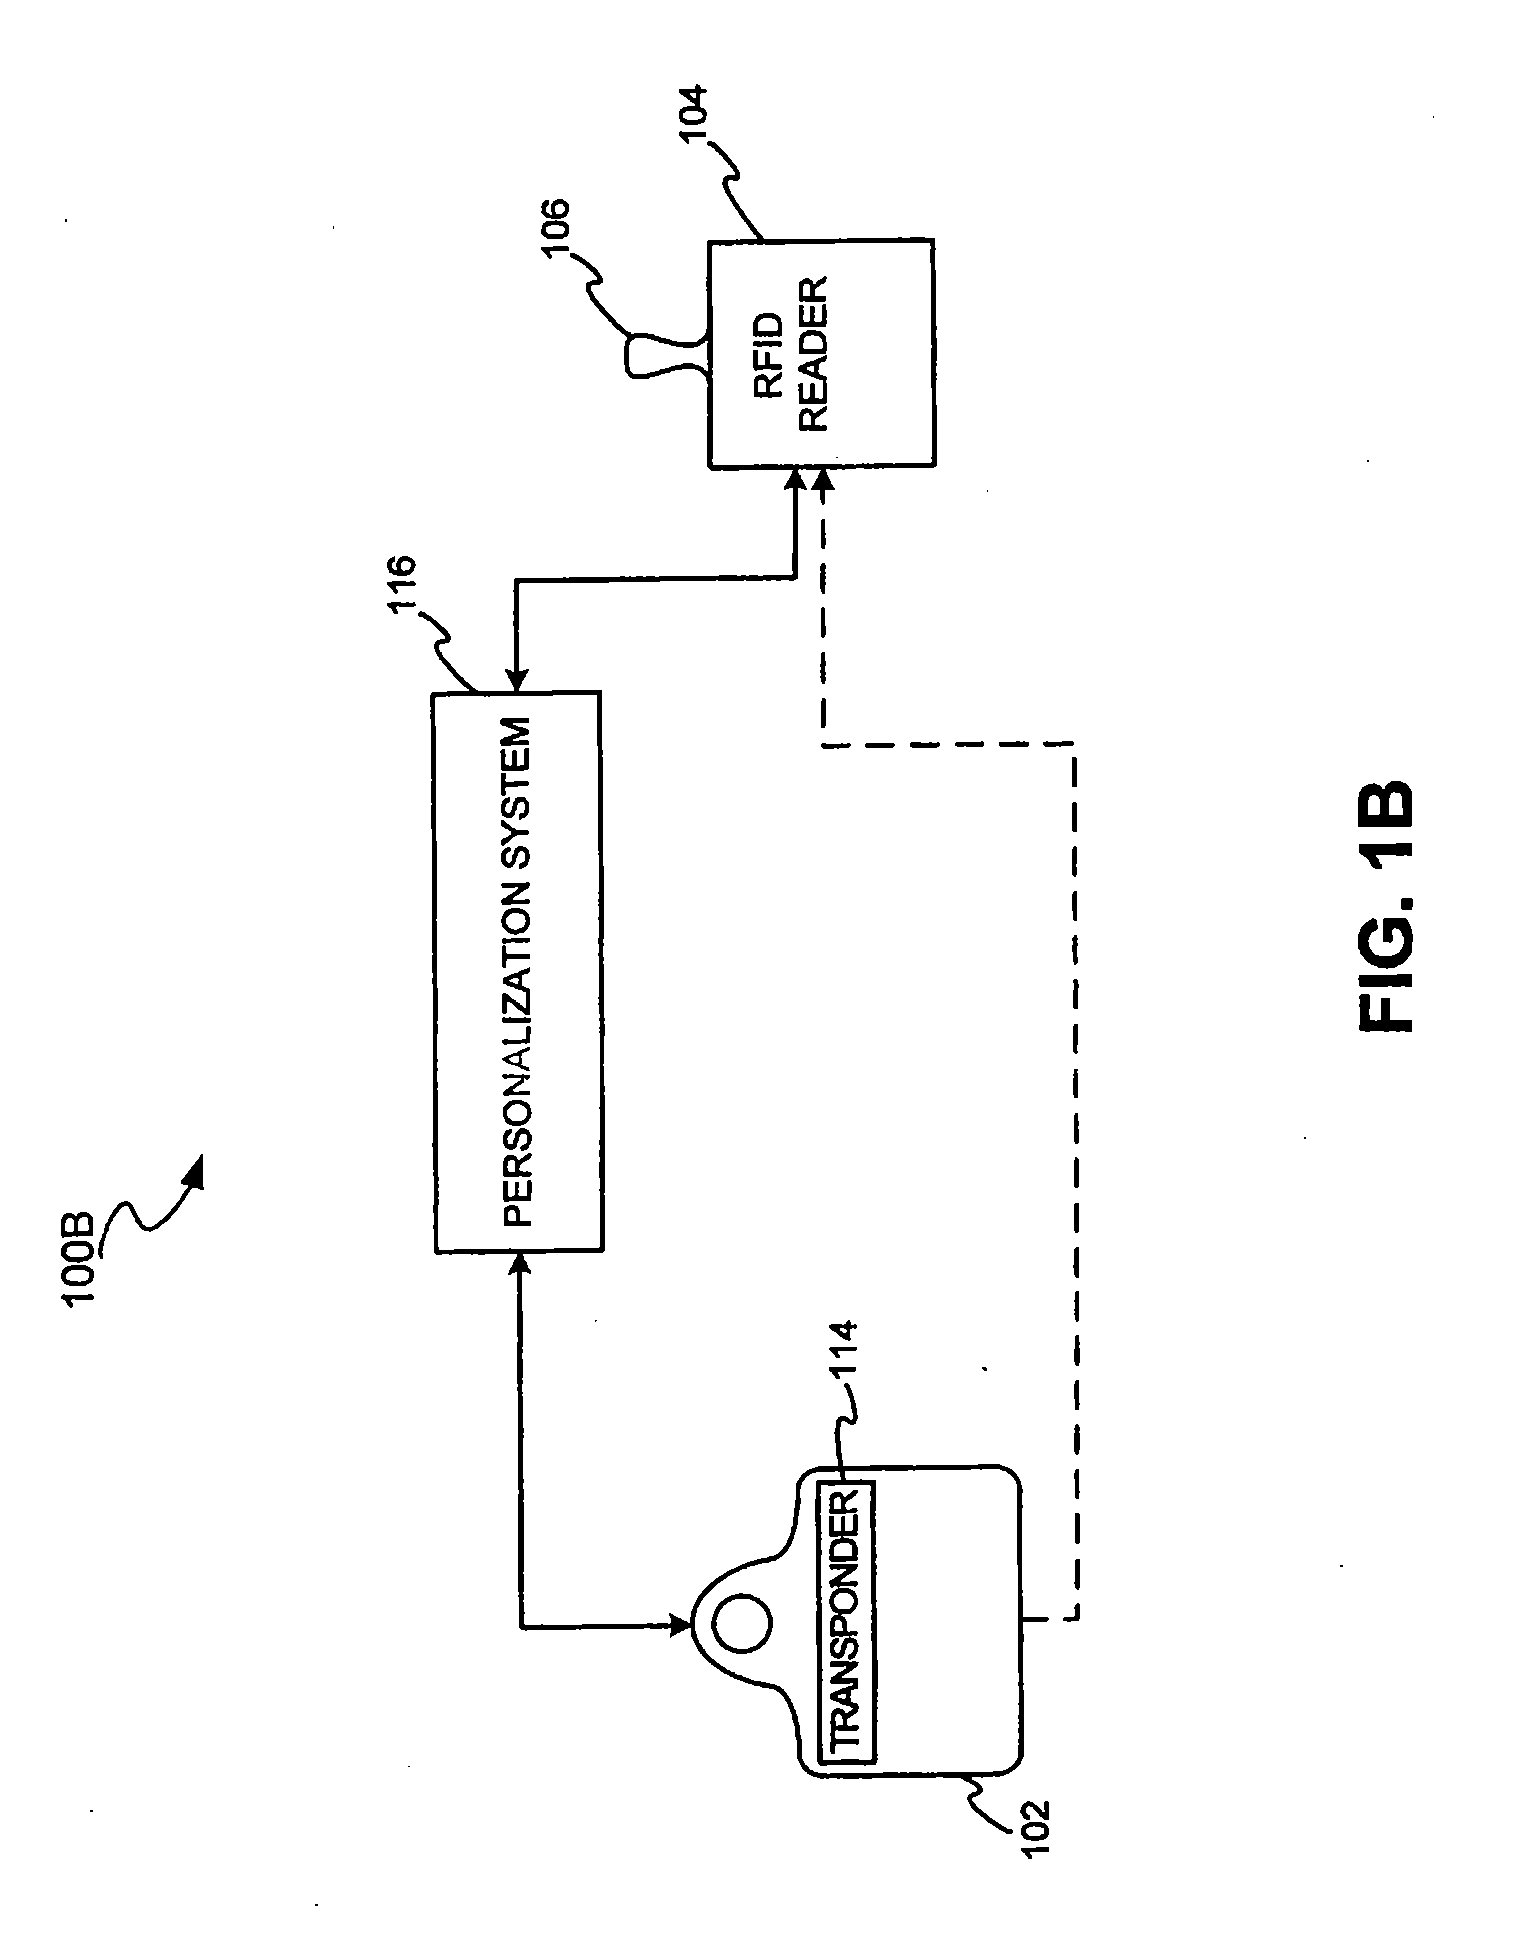 System and method for proffering multiple biometrics for use with a fob